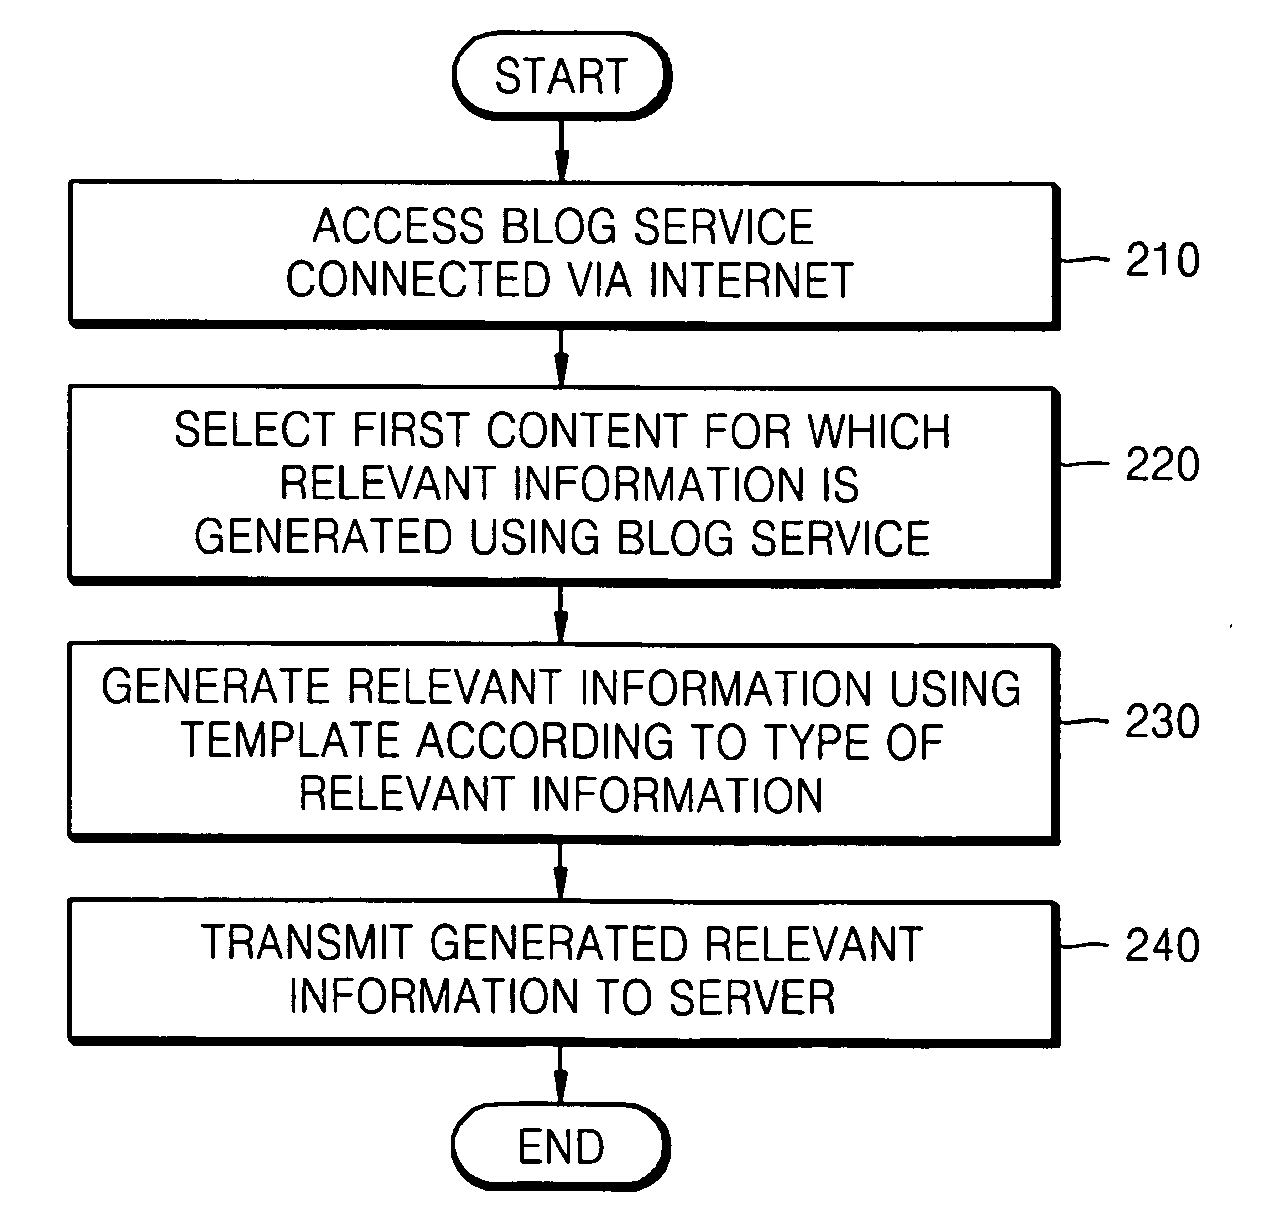 Method and apparatus for generating and providing relevant information related to multimedia content